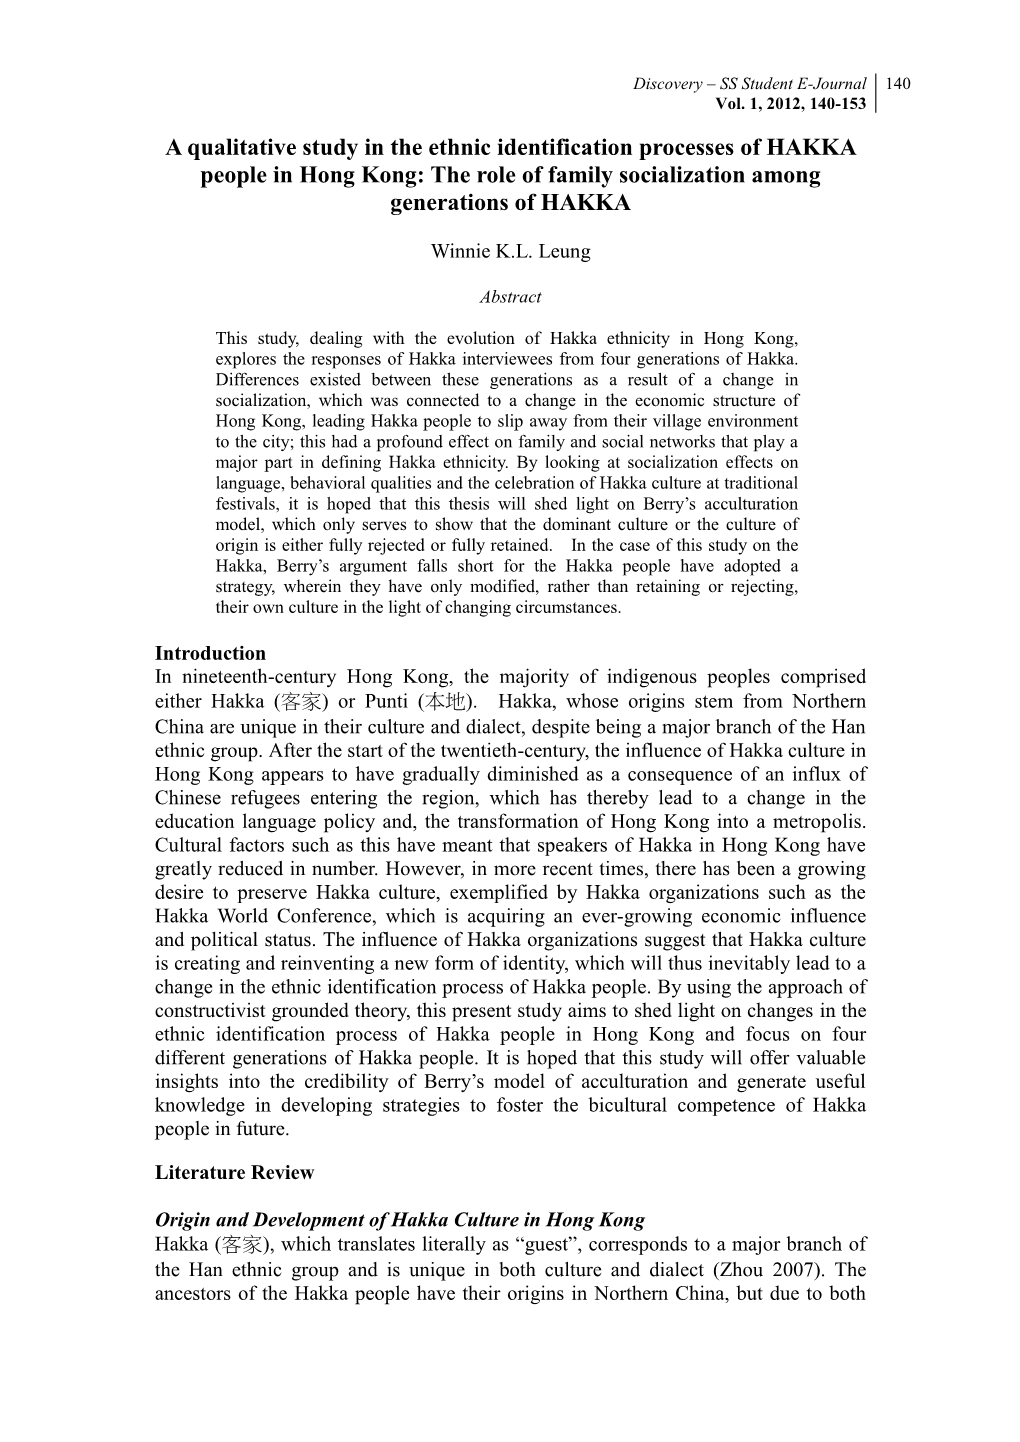 A Qualitative Study in the Ethnic Identification Processes of HAKKA People in Hong Kong: the Role of Family Socialization Among Generations of HAKKA